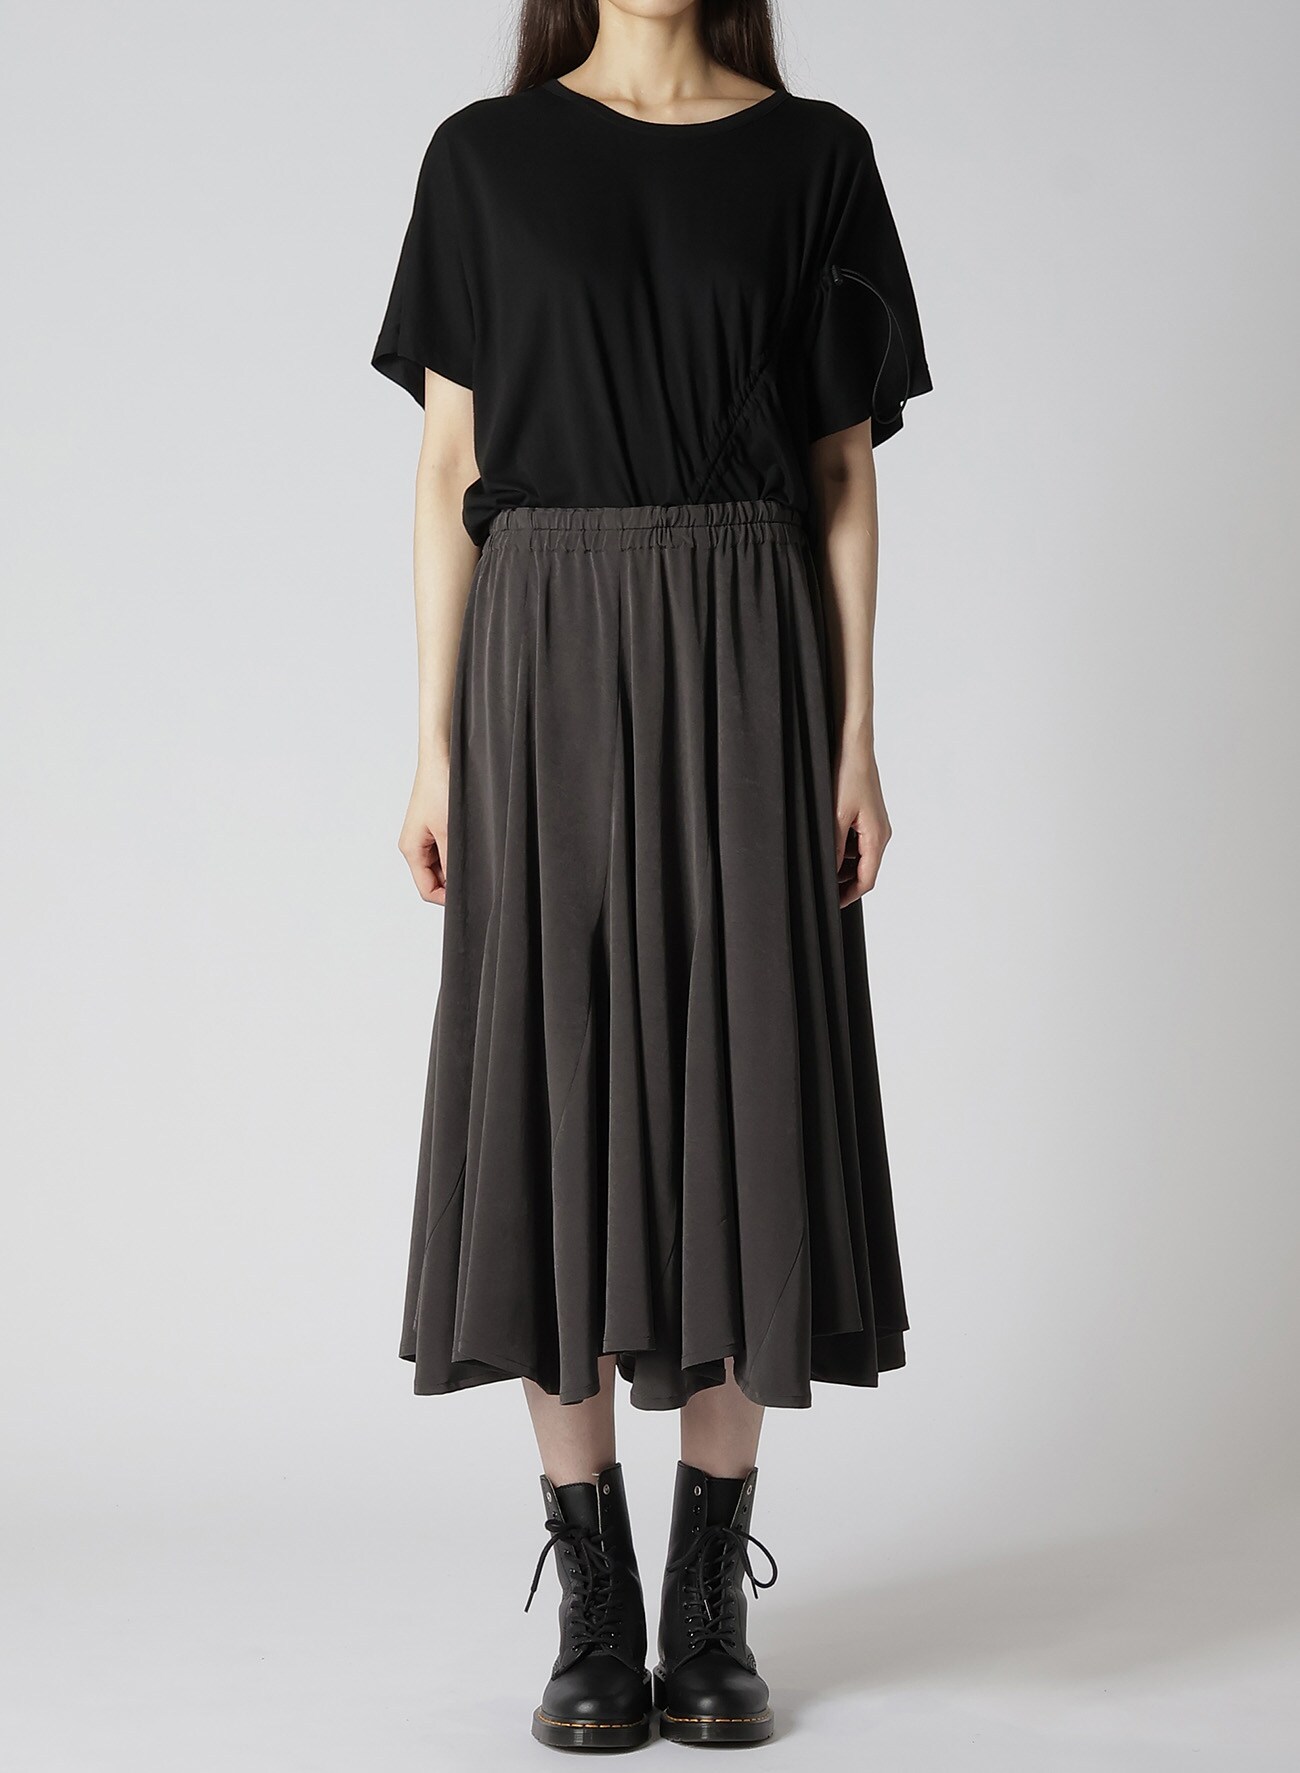 TRIACETATE/POLYESTER CREPE de CHINE 10PIECES GATHERED SKIRT(FREE 